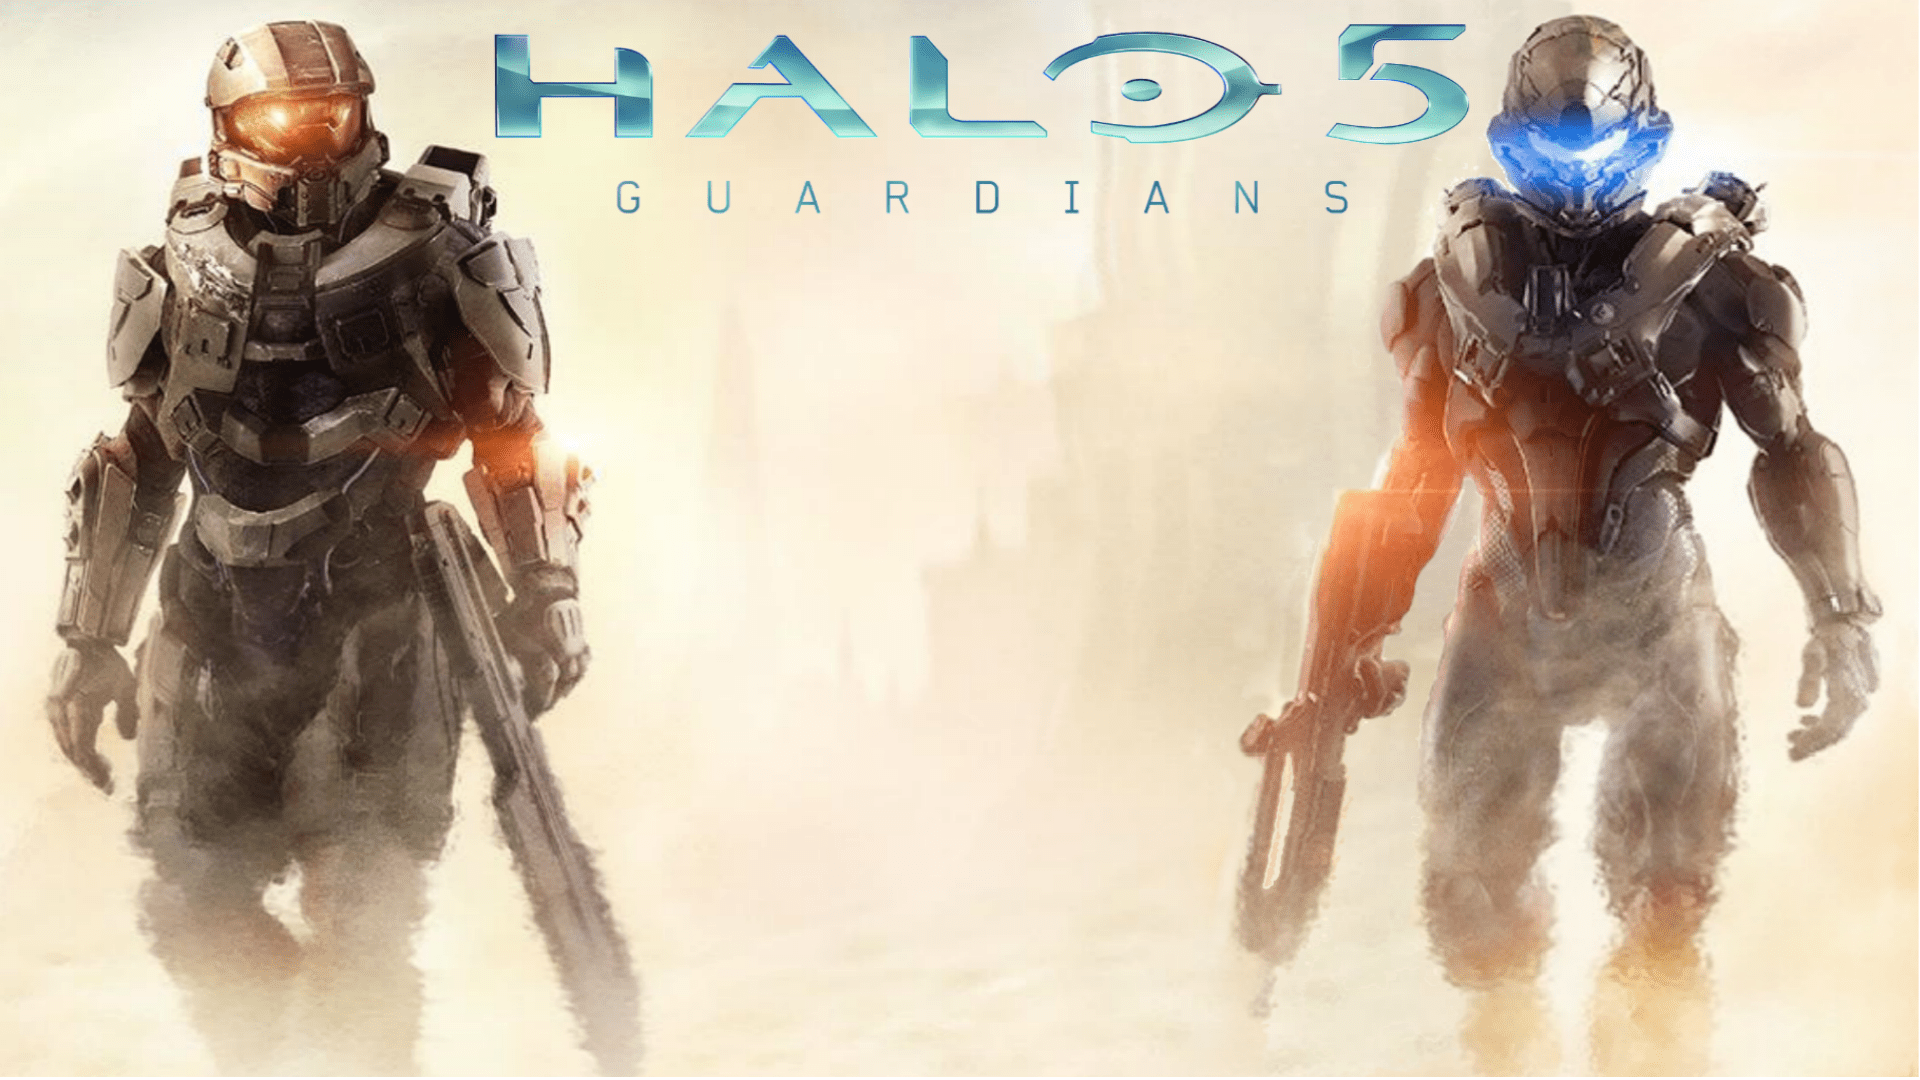 Video Game Halo 5 Guardians 4k Ultra HD Wallpaper by nose